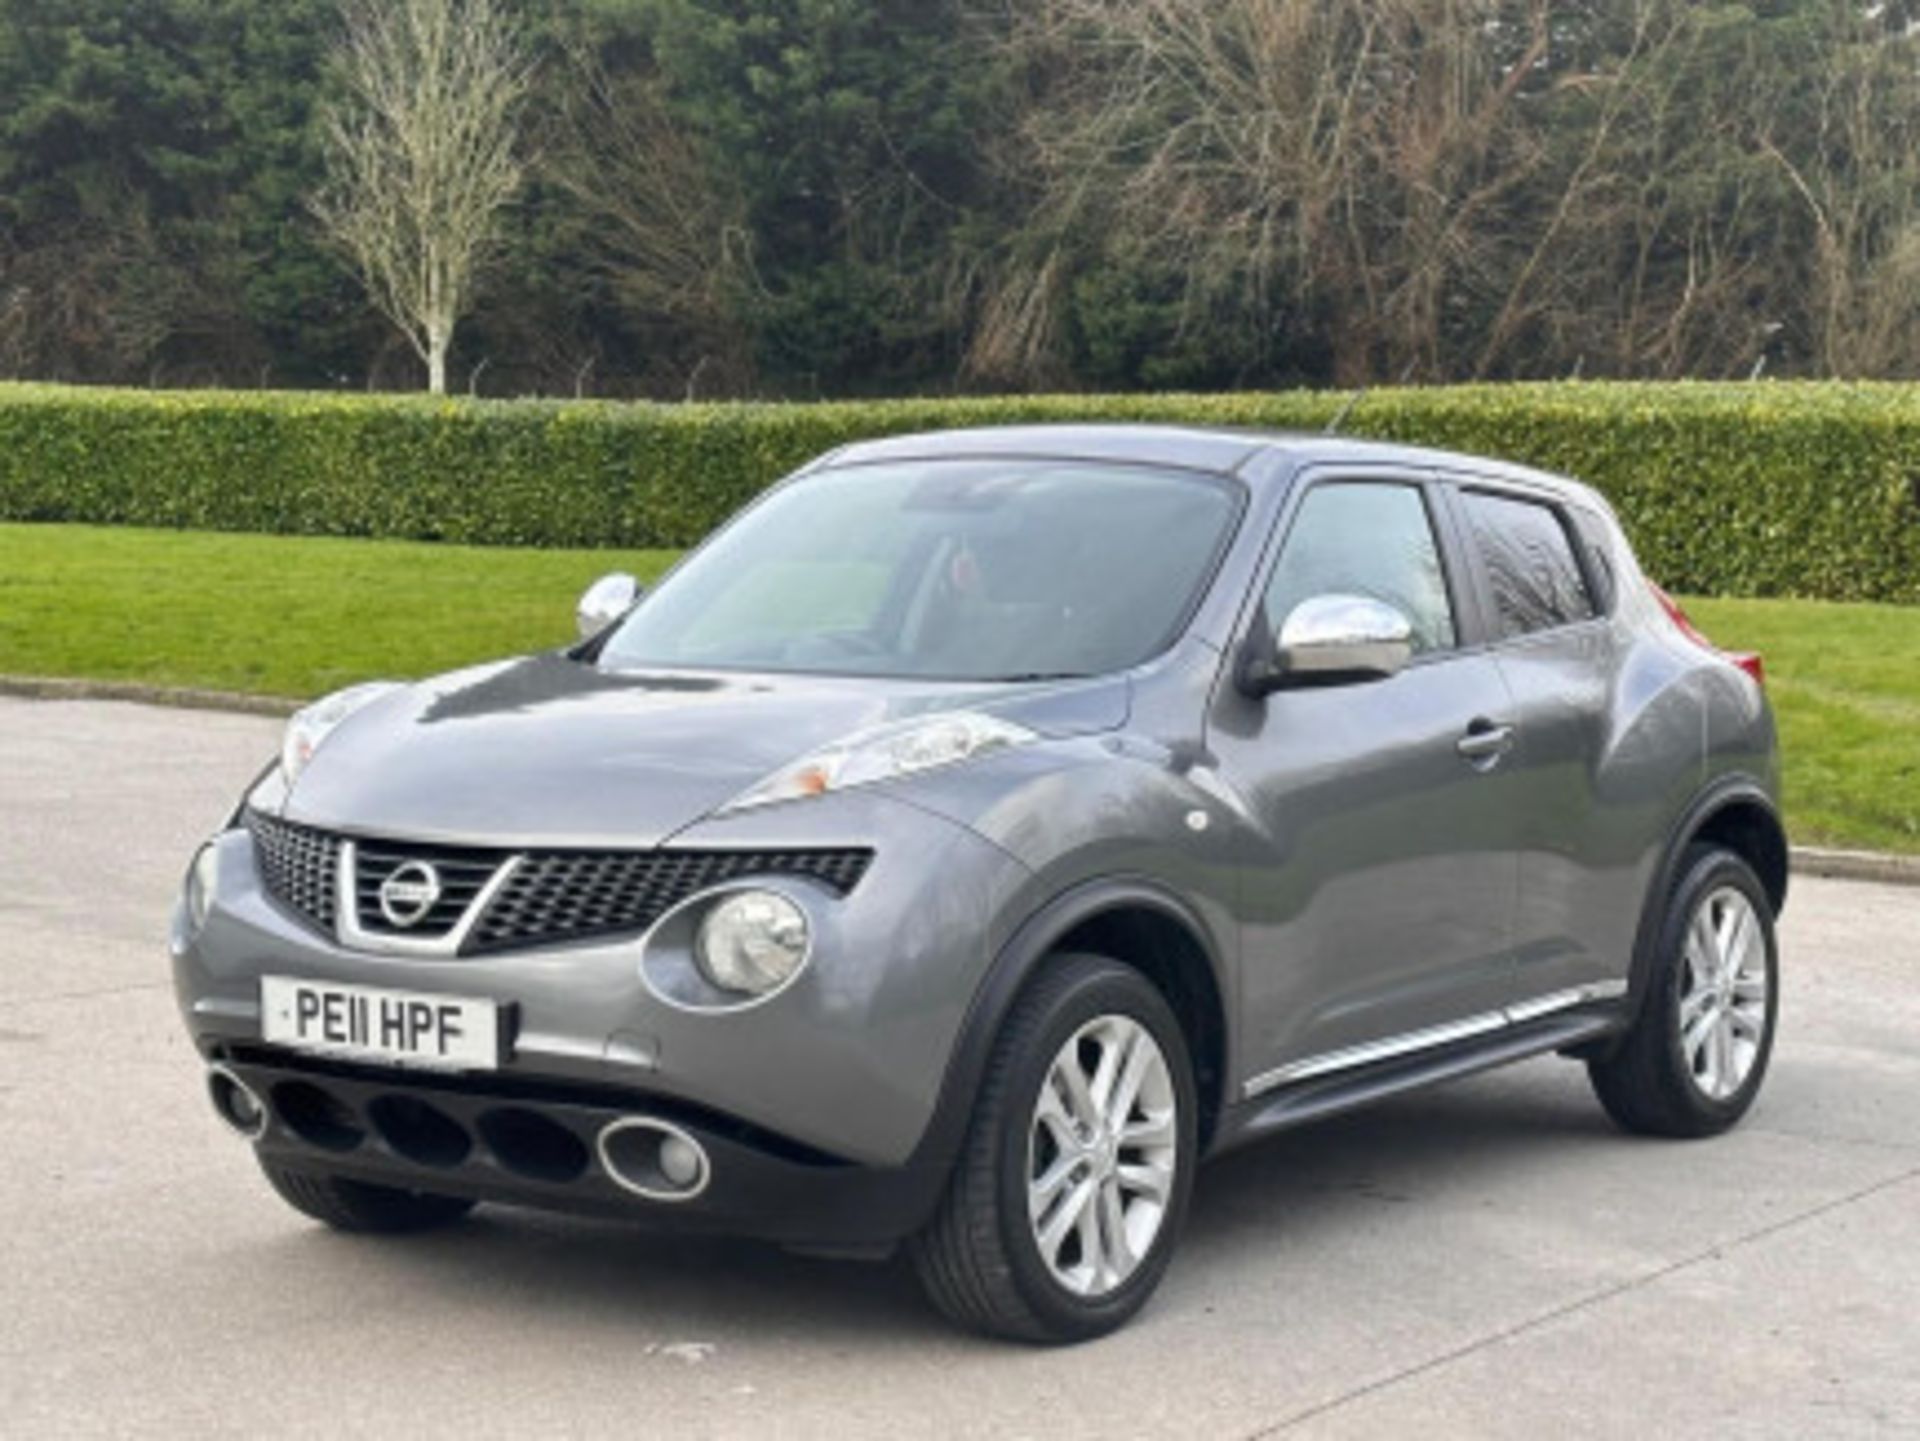 >>--NO VAT ON HAMMER--<< NISSAN JUKE 1.5 DCI ACENTA SPORT: A PRACTICAL AND SPORTY SUV - Image 50 of 97